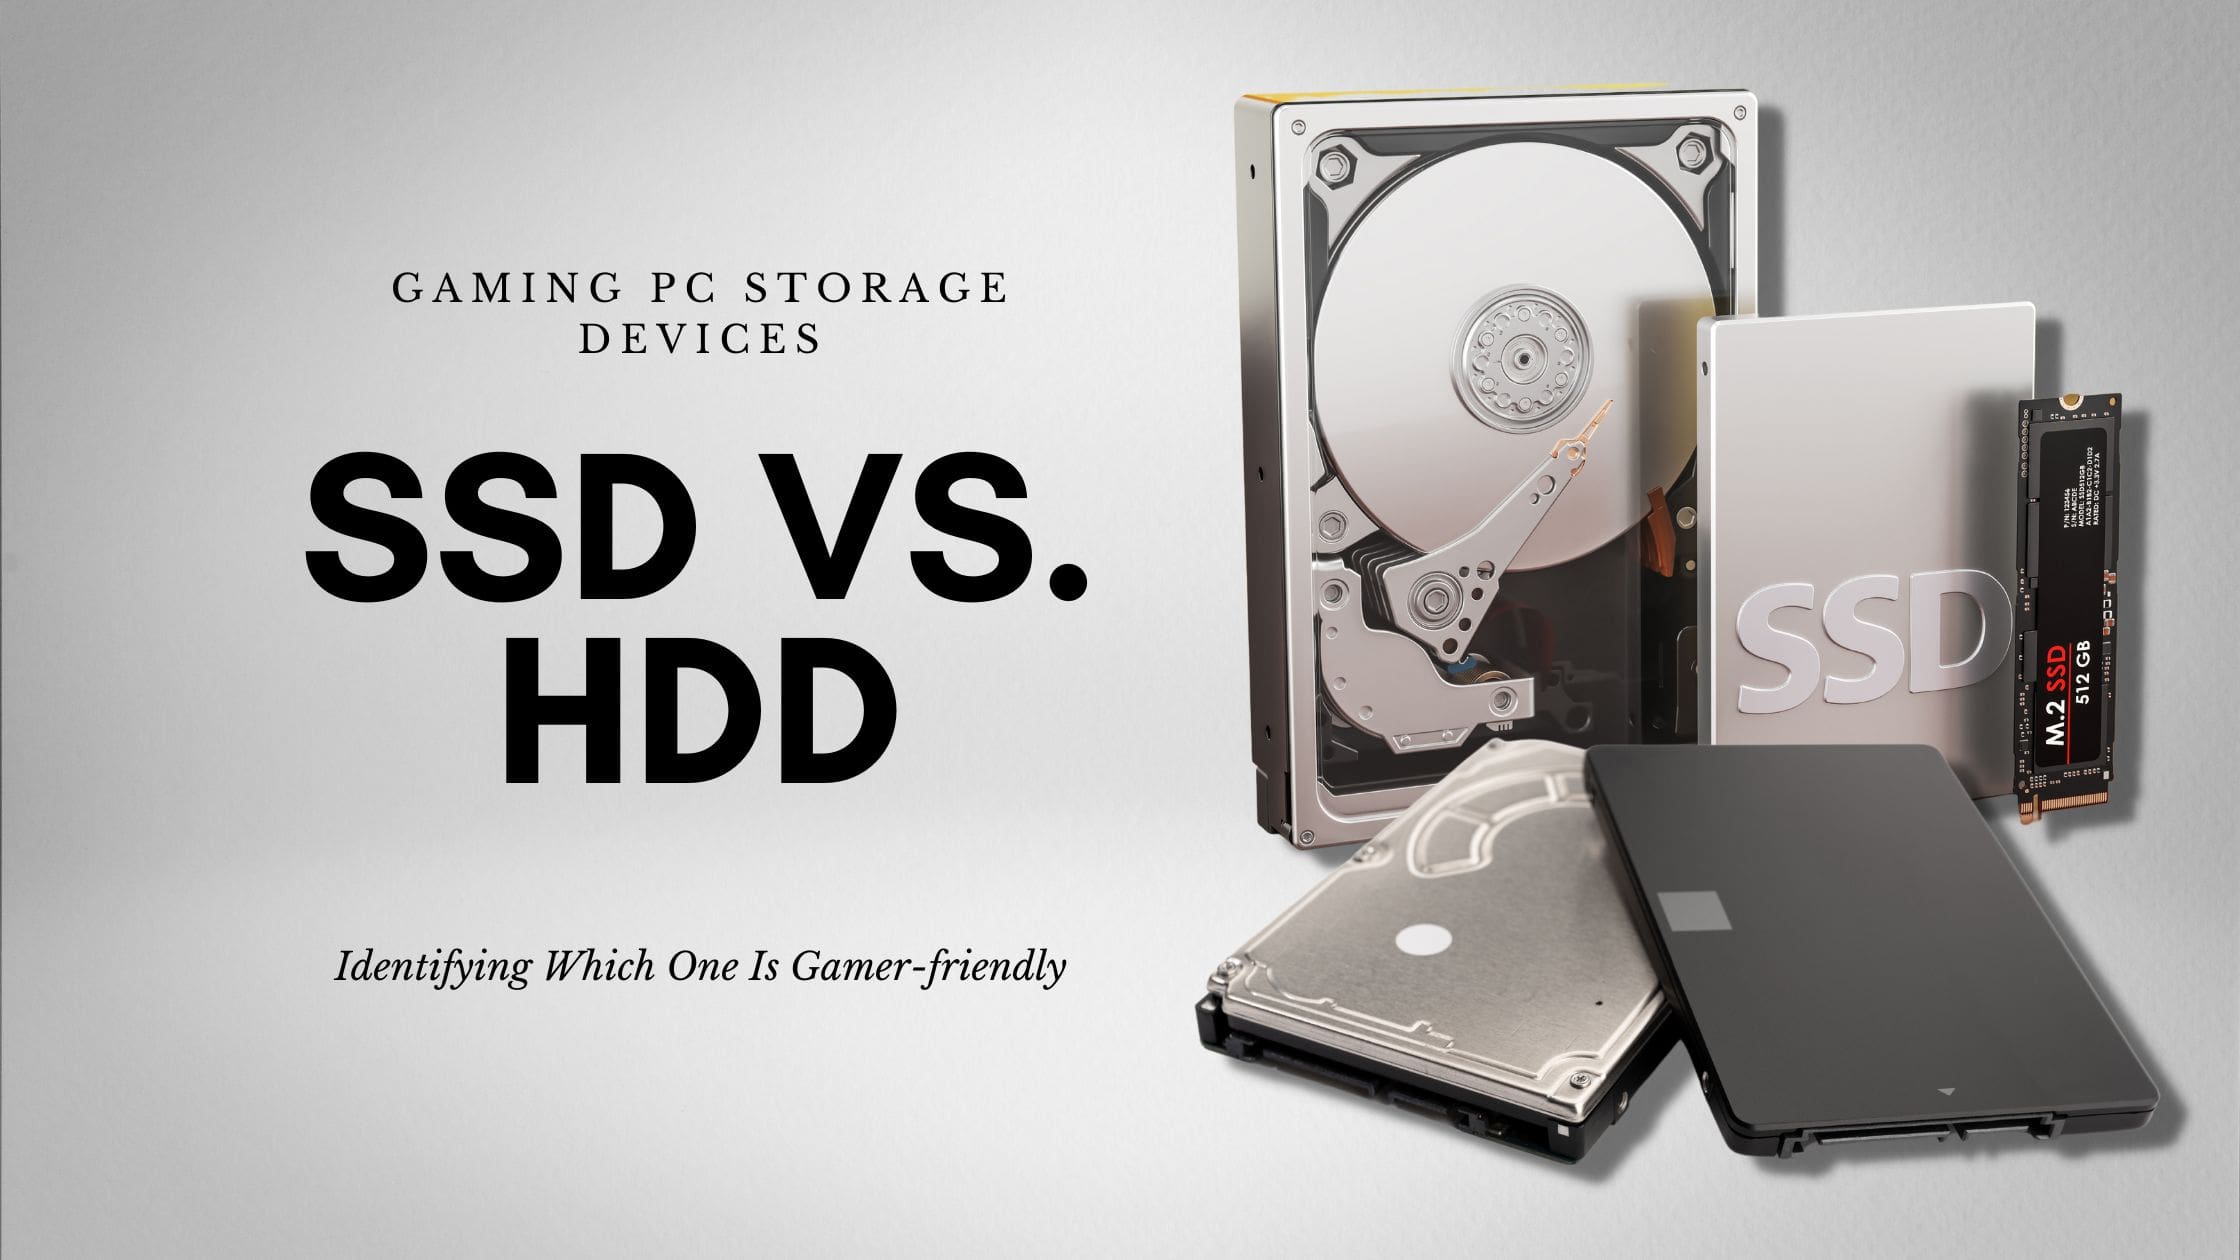 Comparison of SSD and HDD storage options for gamers